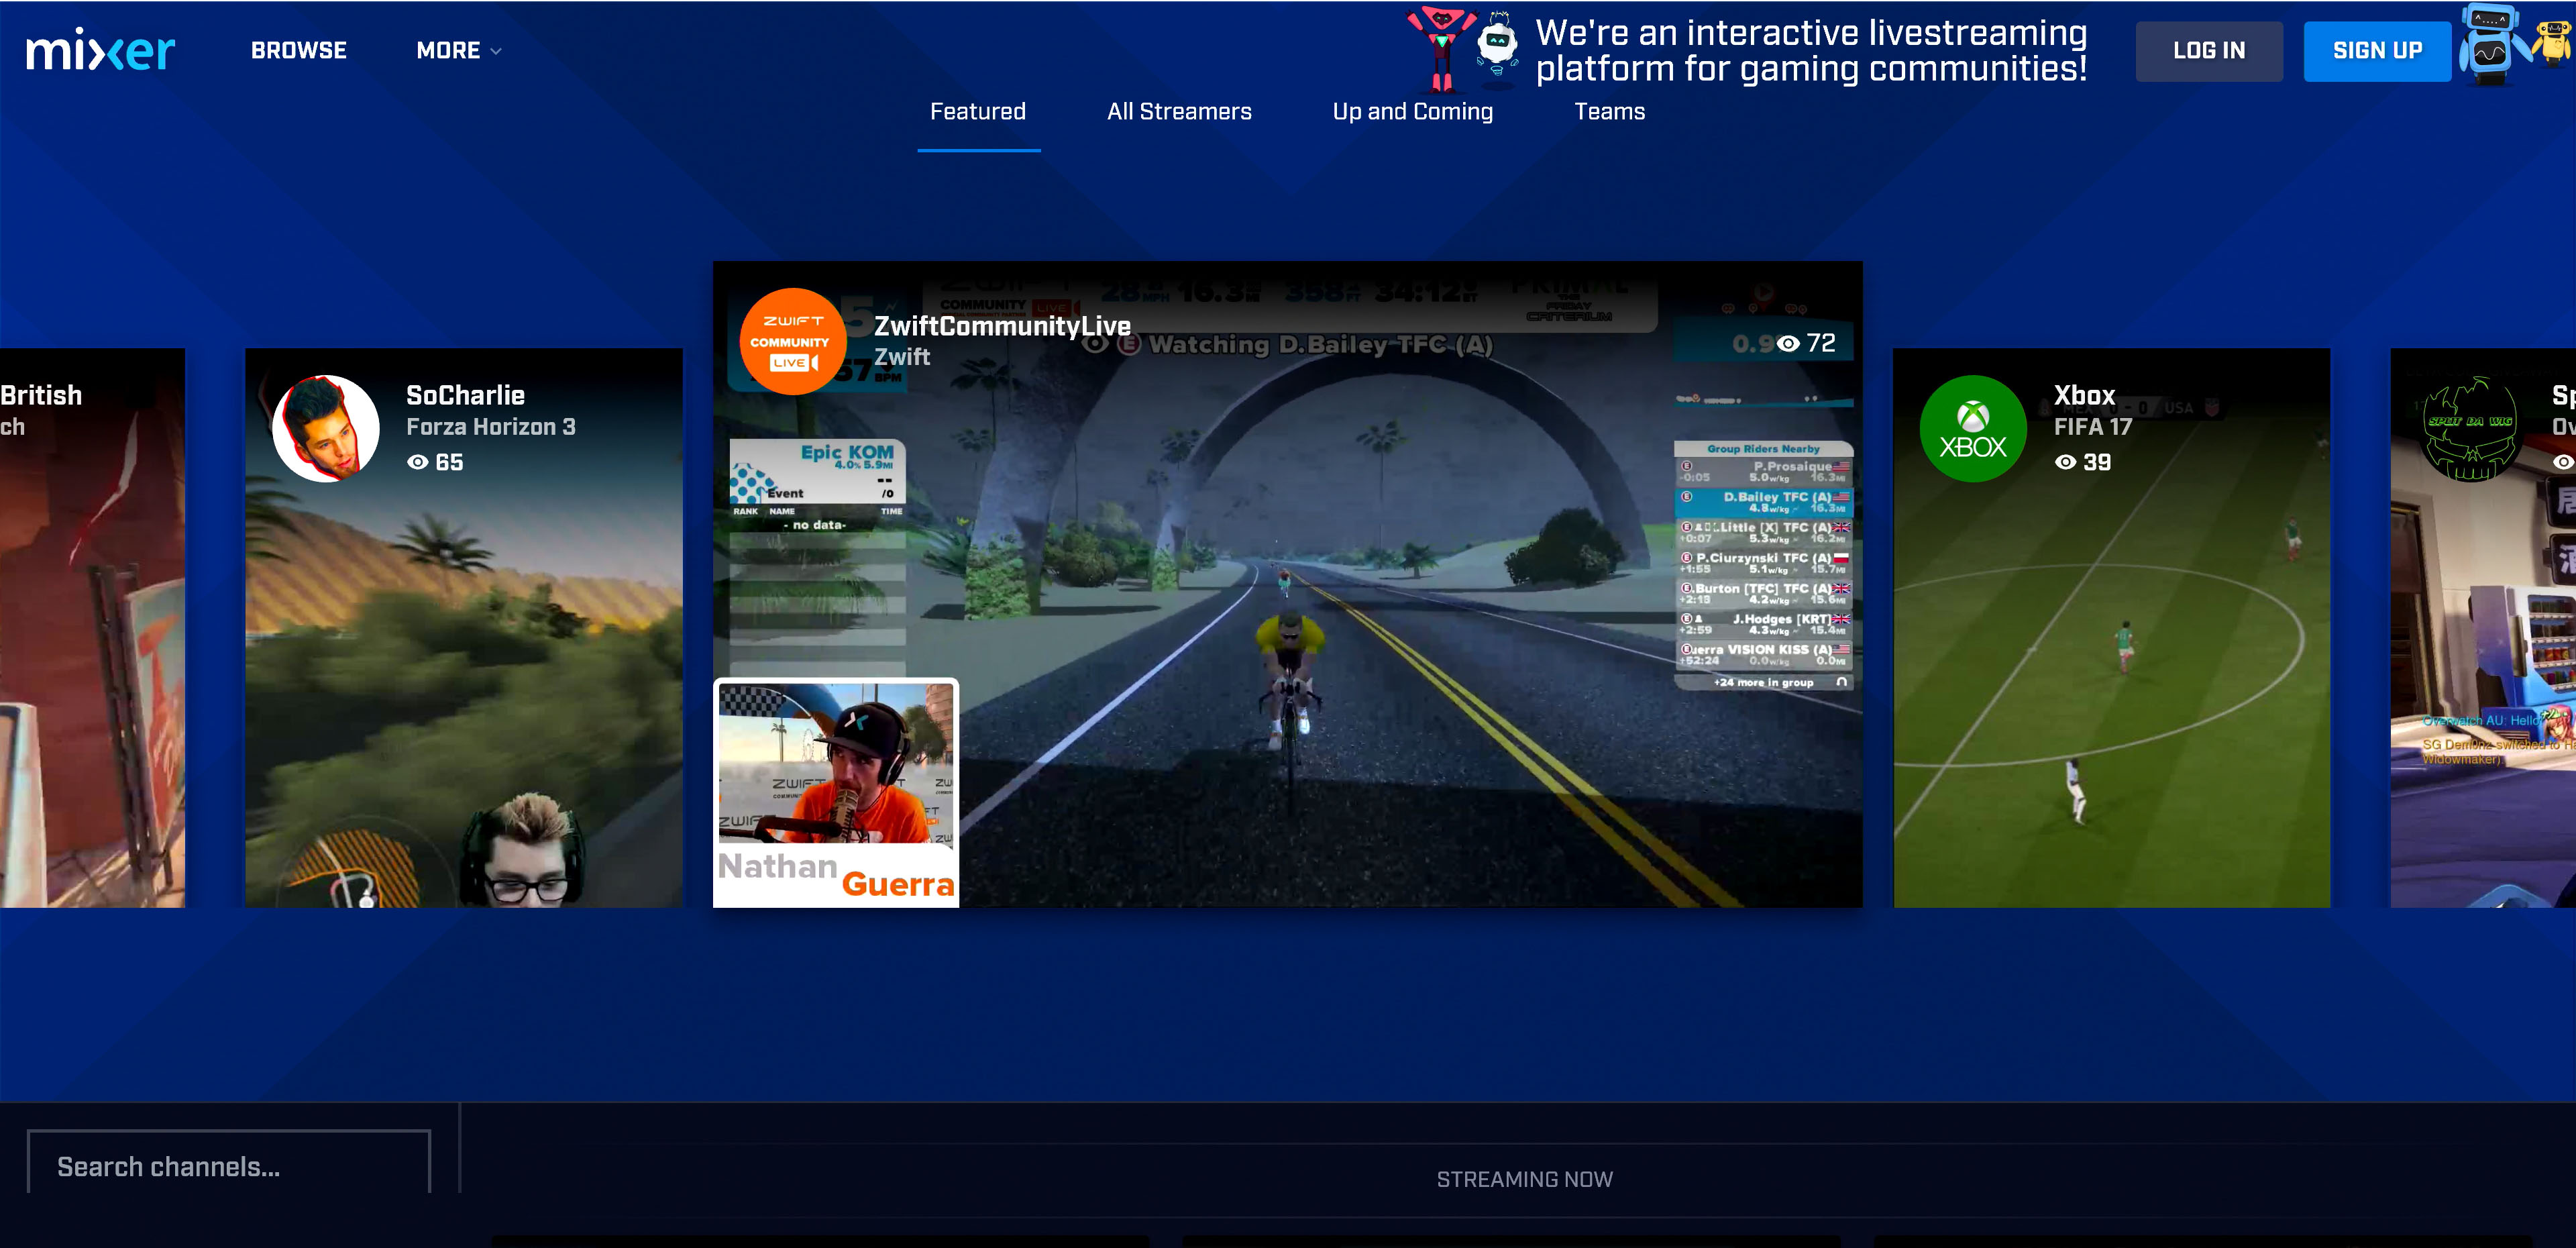 Windows 10 Tip: How to get started viewing and streaming Mixer | Windows Blog